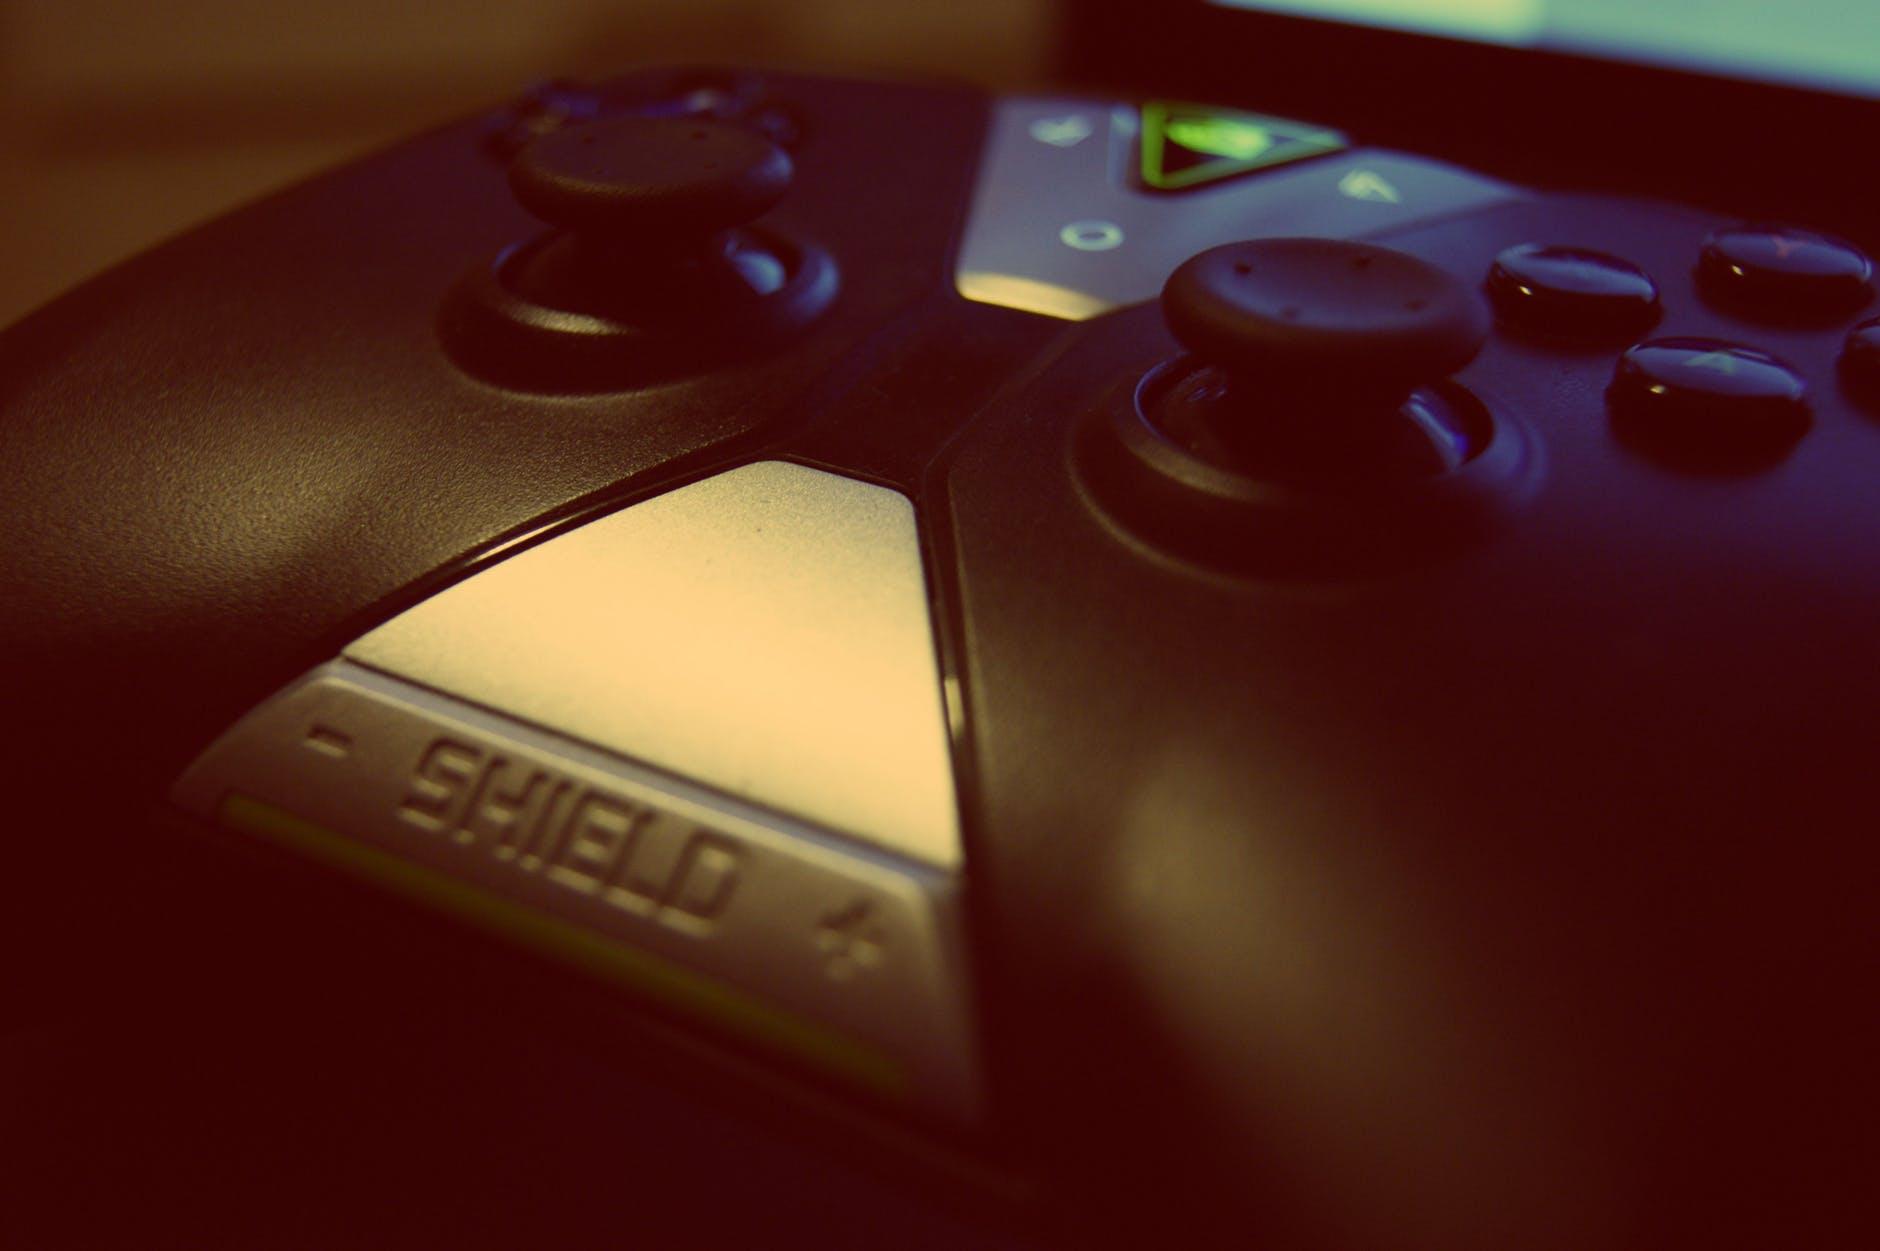 black shield game controller close up photography